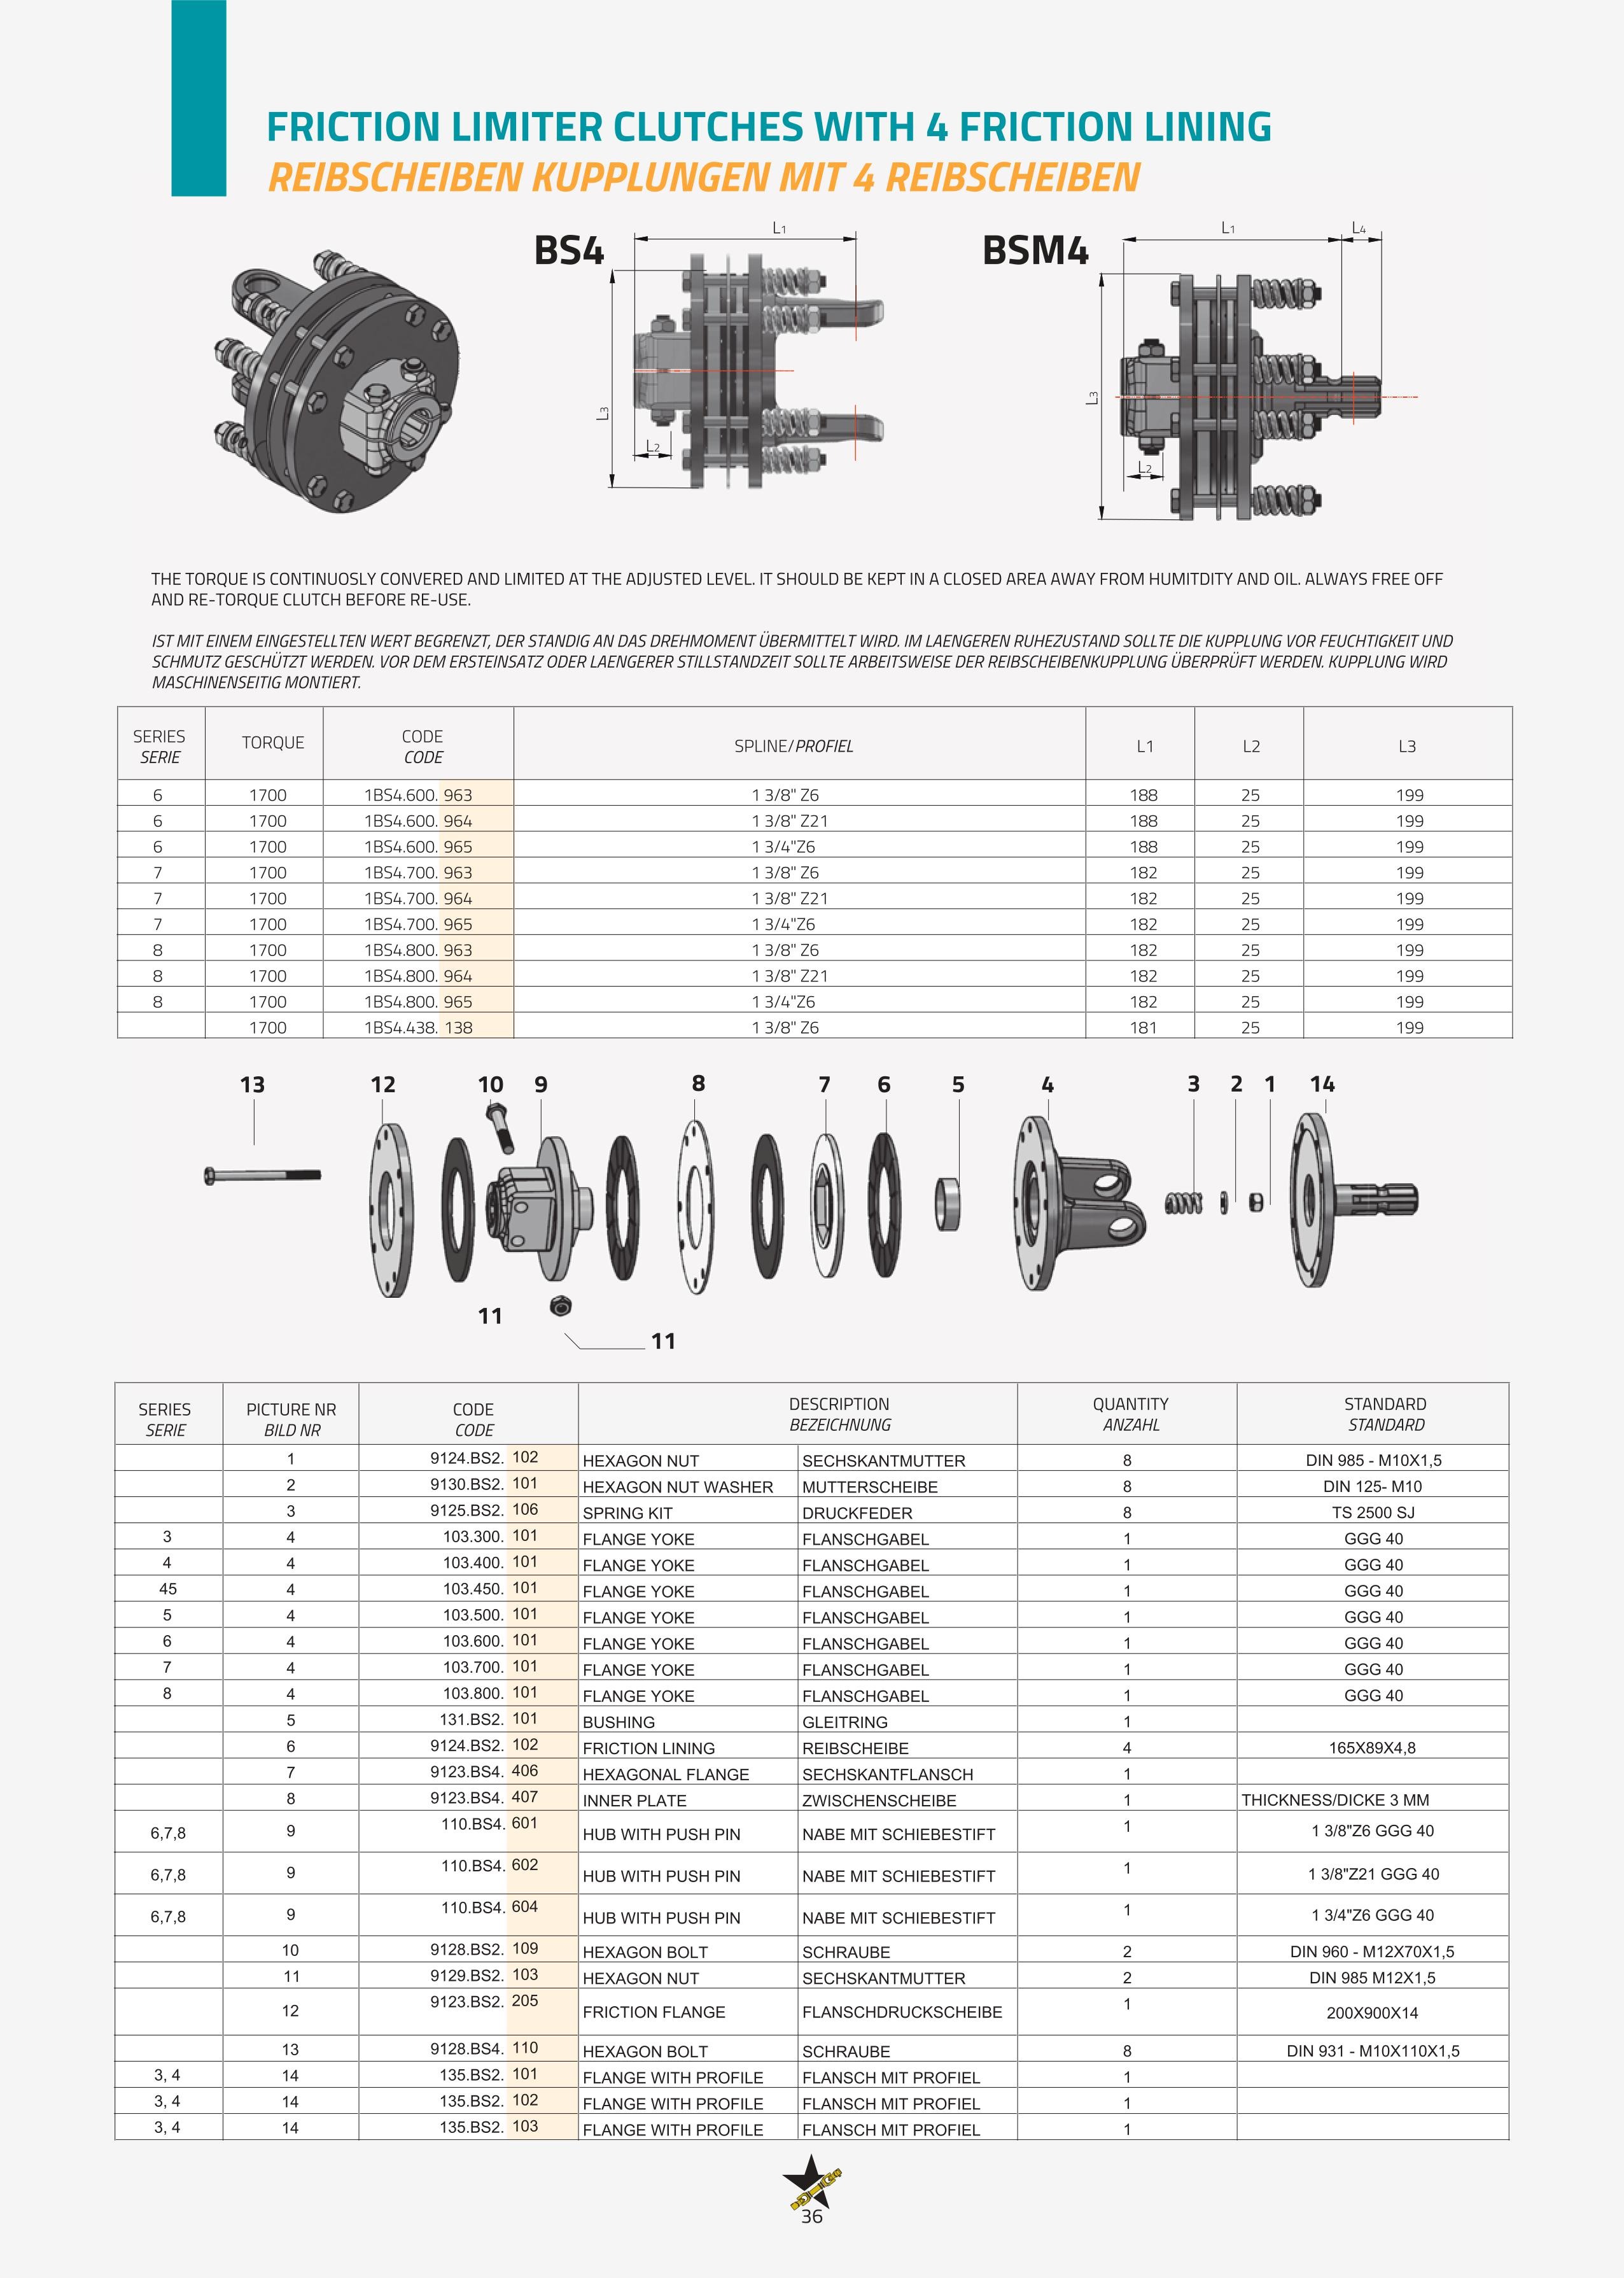 Friction Limiter Clutches With 4 Friction Lining